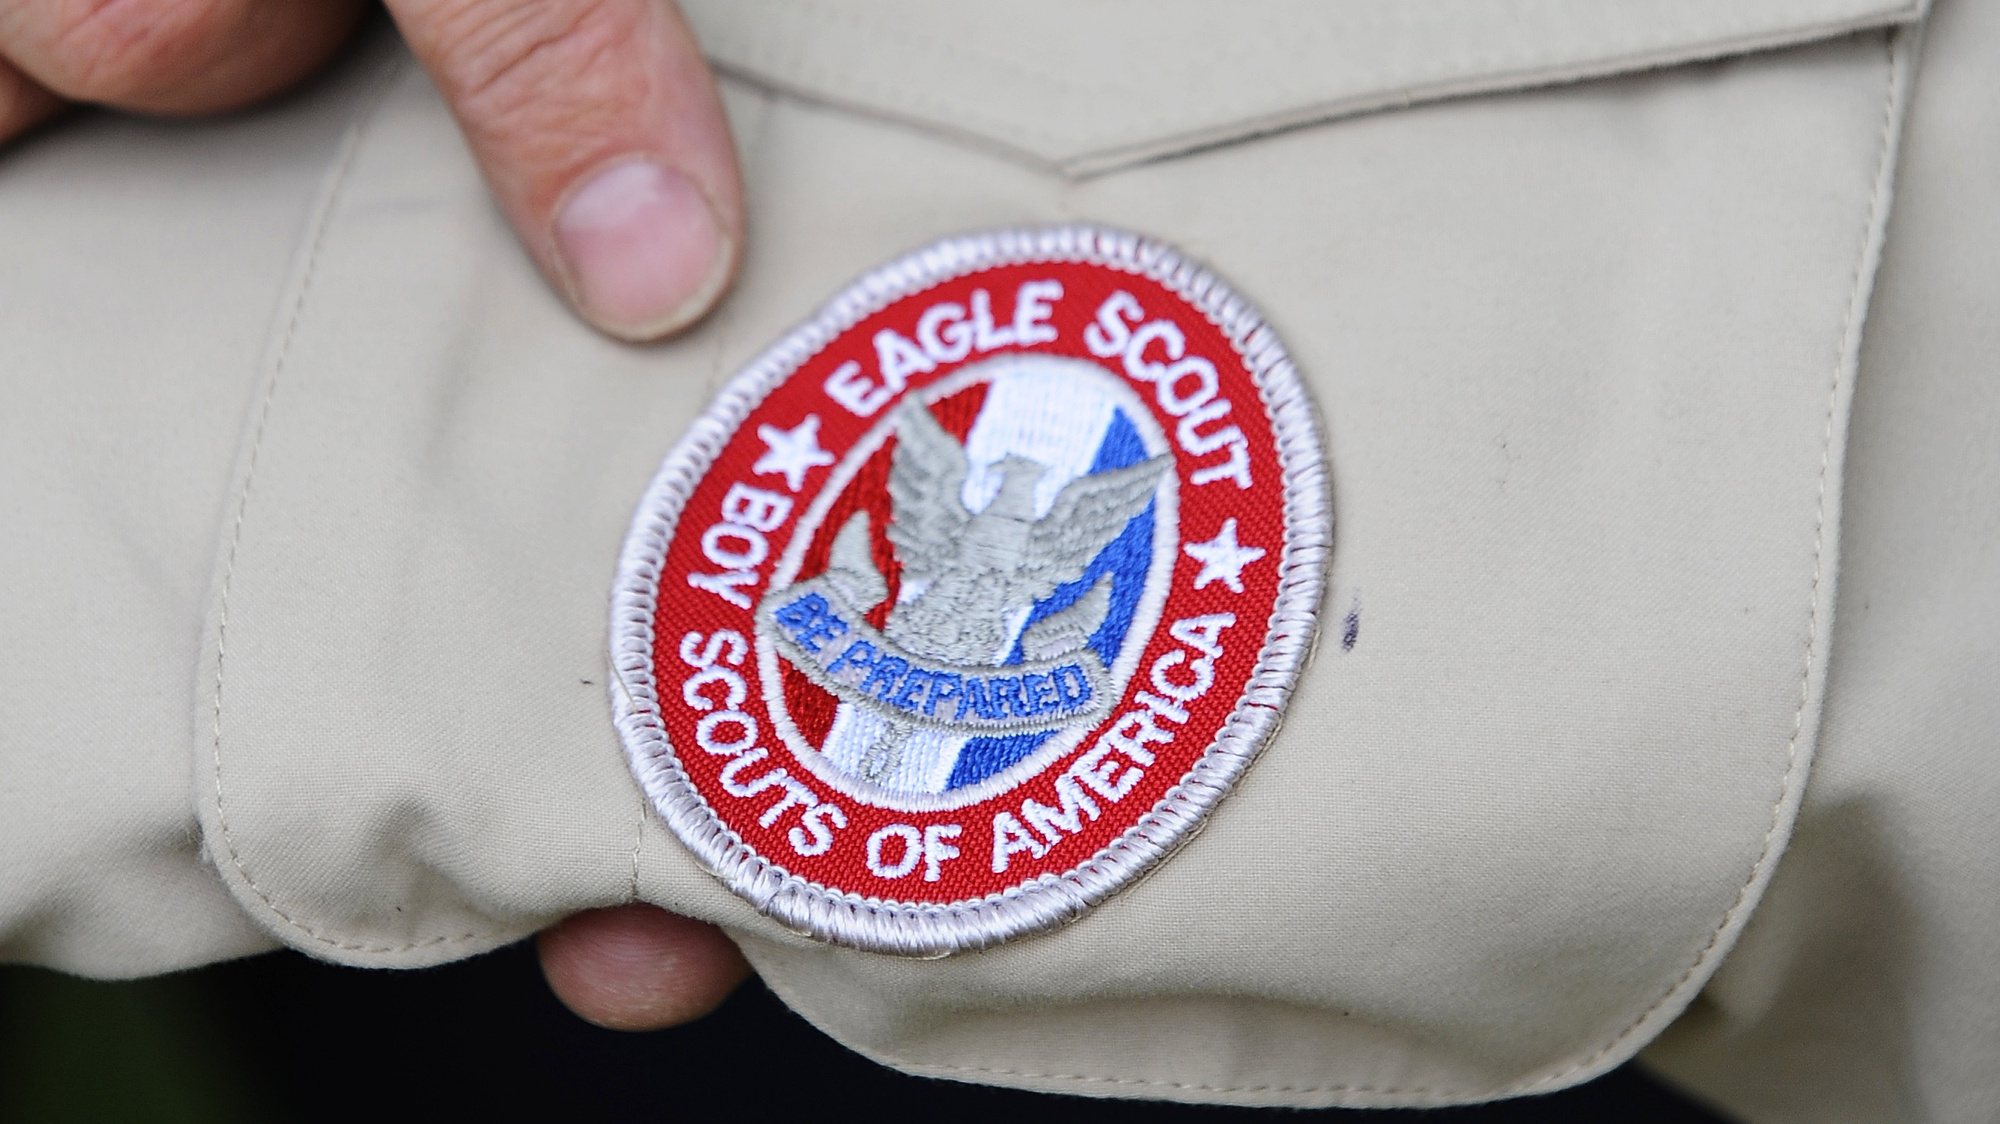 epa08225658 (FILE) - A badge of the Boy Scouts of America is photographed in Grapevine, Texas, USA, 23 May 2013 (reissued 18 February 2020). According to media reports, the Boy Scouts of America organisation has filed for bankruptcy in order to build a fund for victims of alleged sexual abuse within the organisation.  EPA/RALPH LAUER